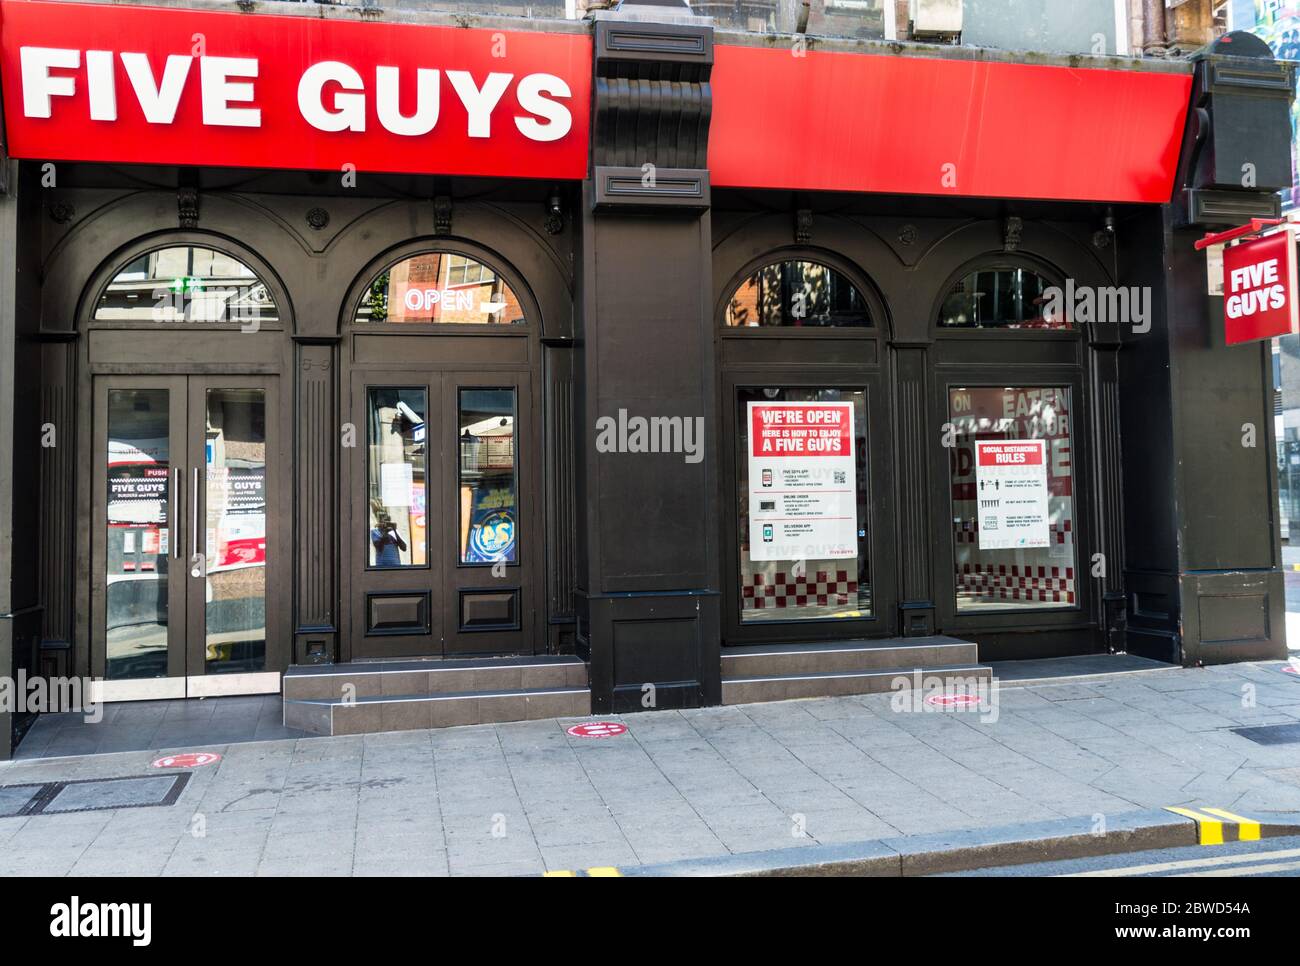 Five guys fast food restaurant operating take away only with strict social distancing rules Stock Photo